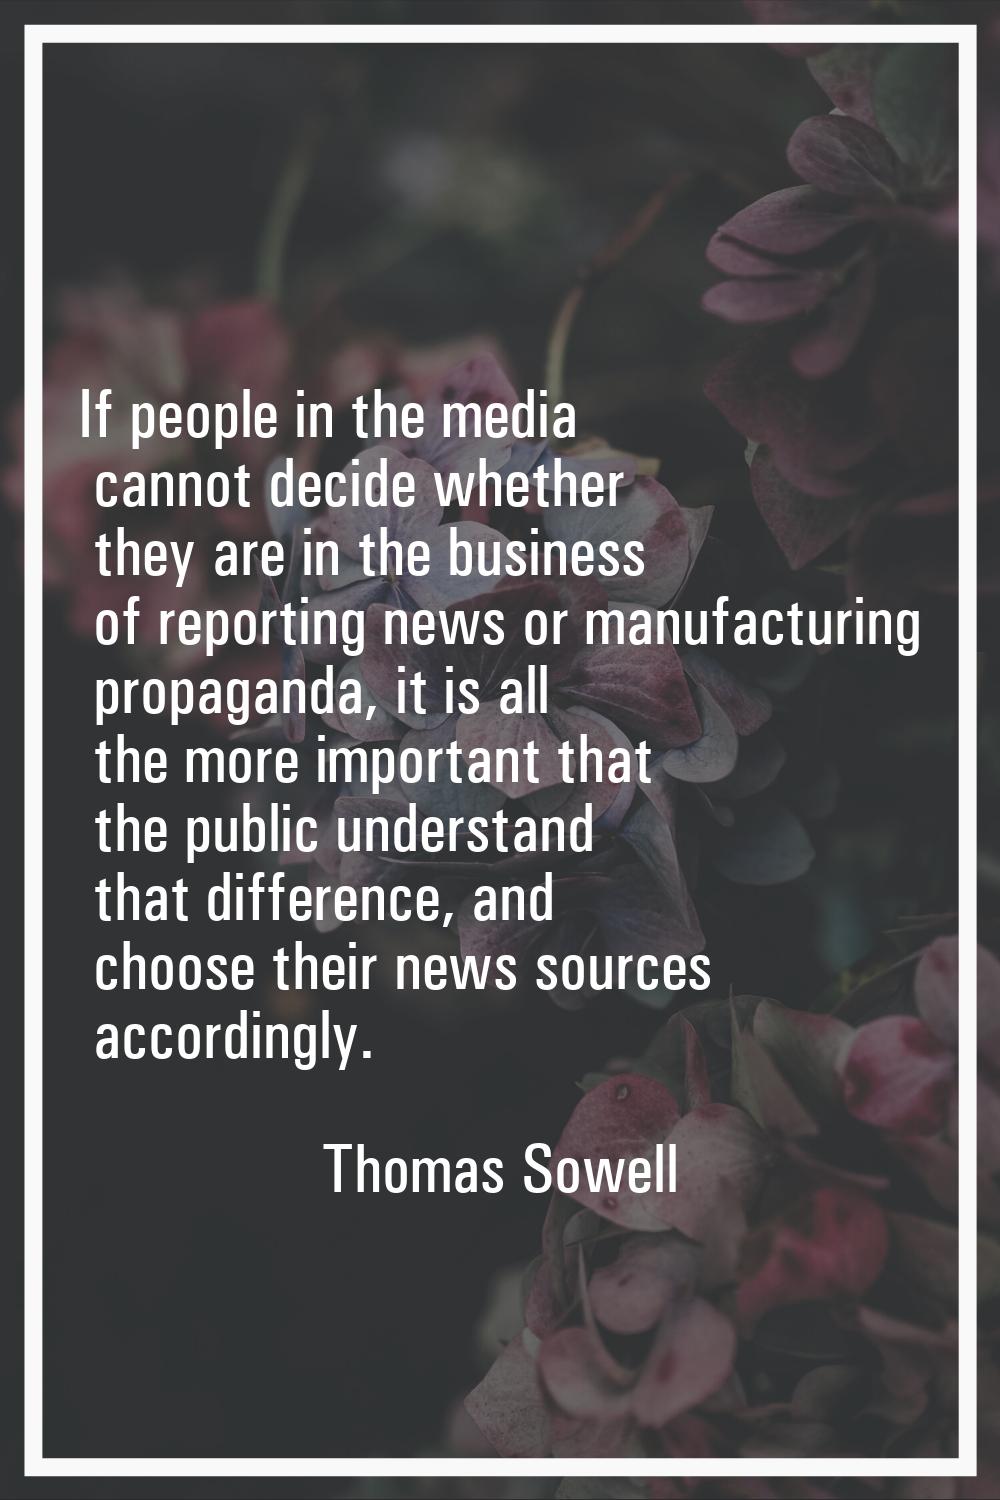 If people in the media cannot decide whether they are in the business of reporting news or manufact